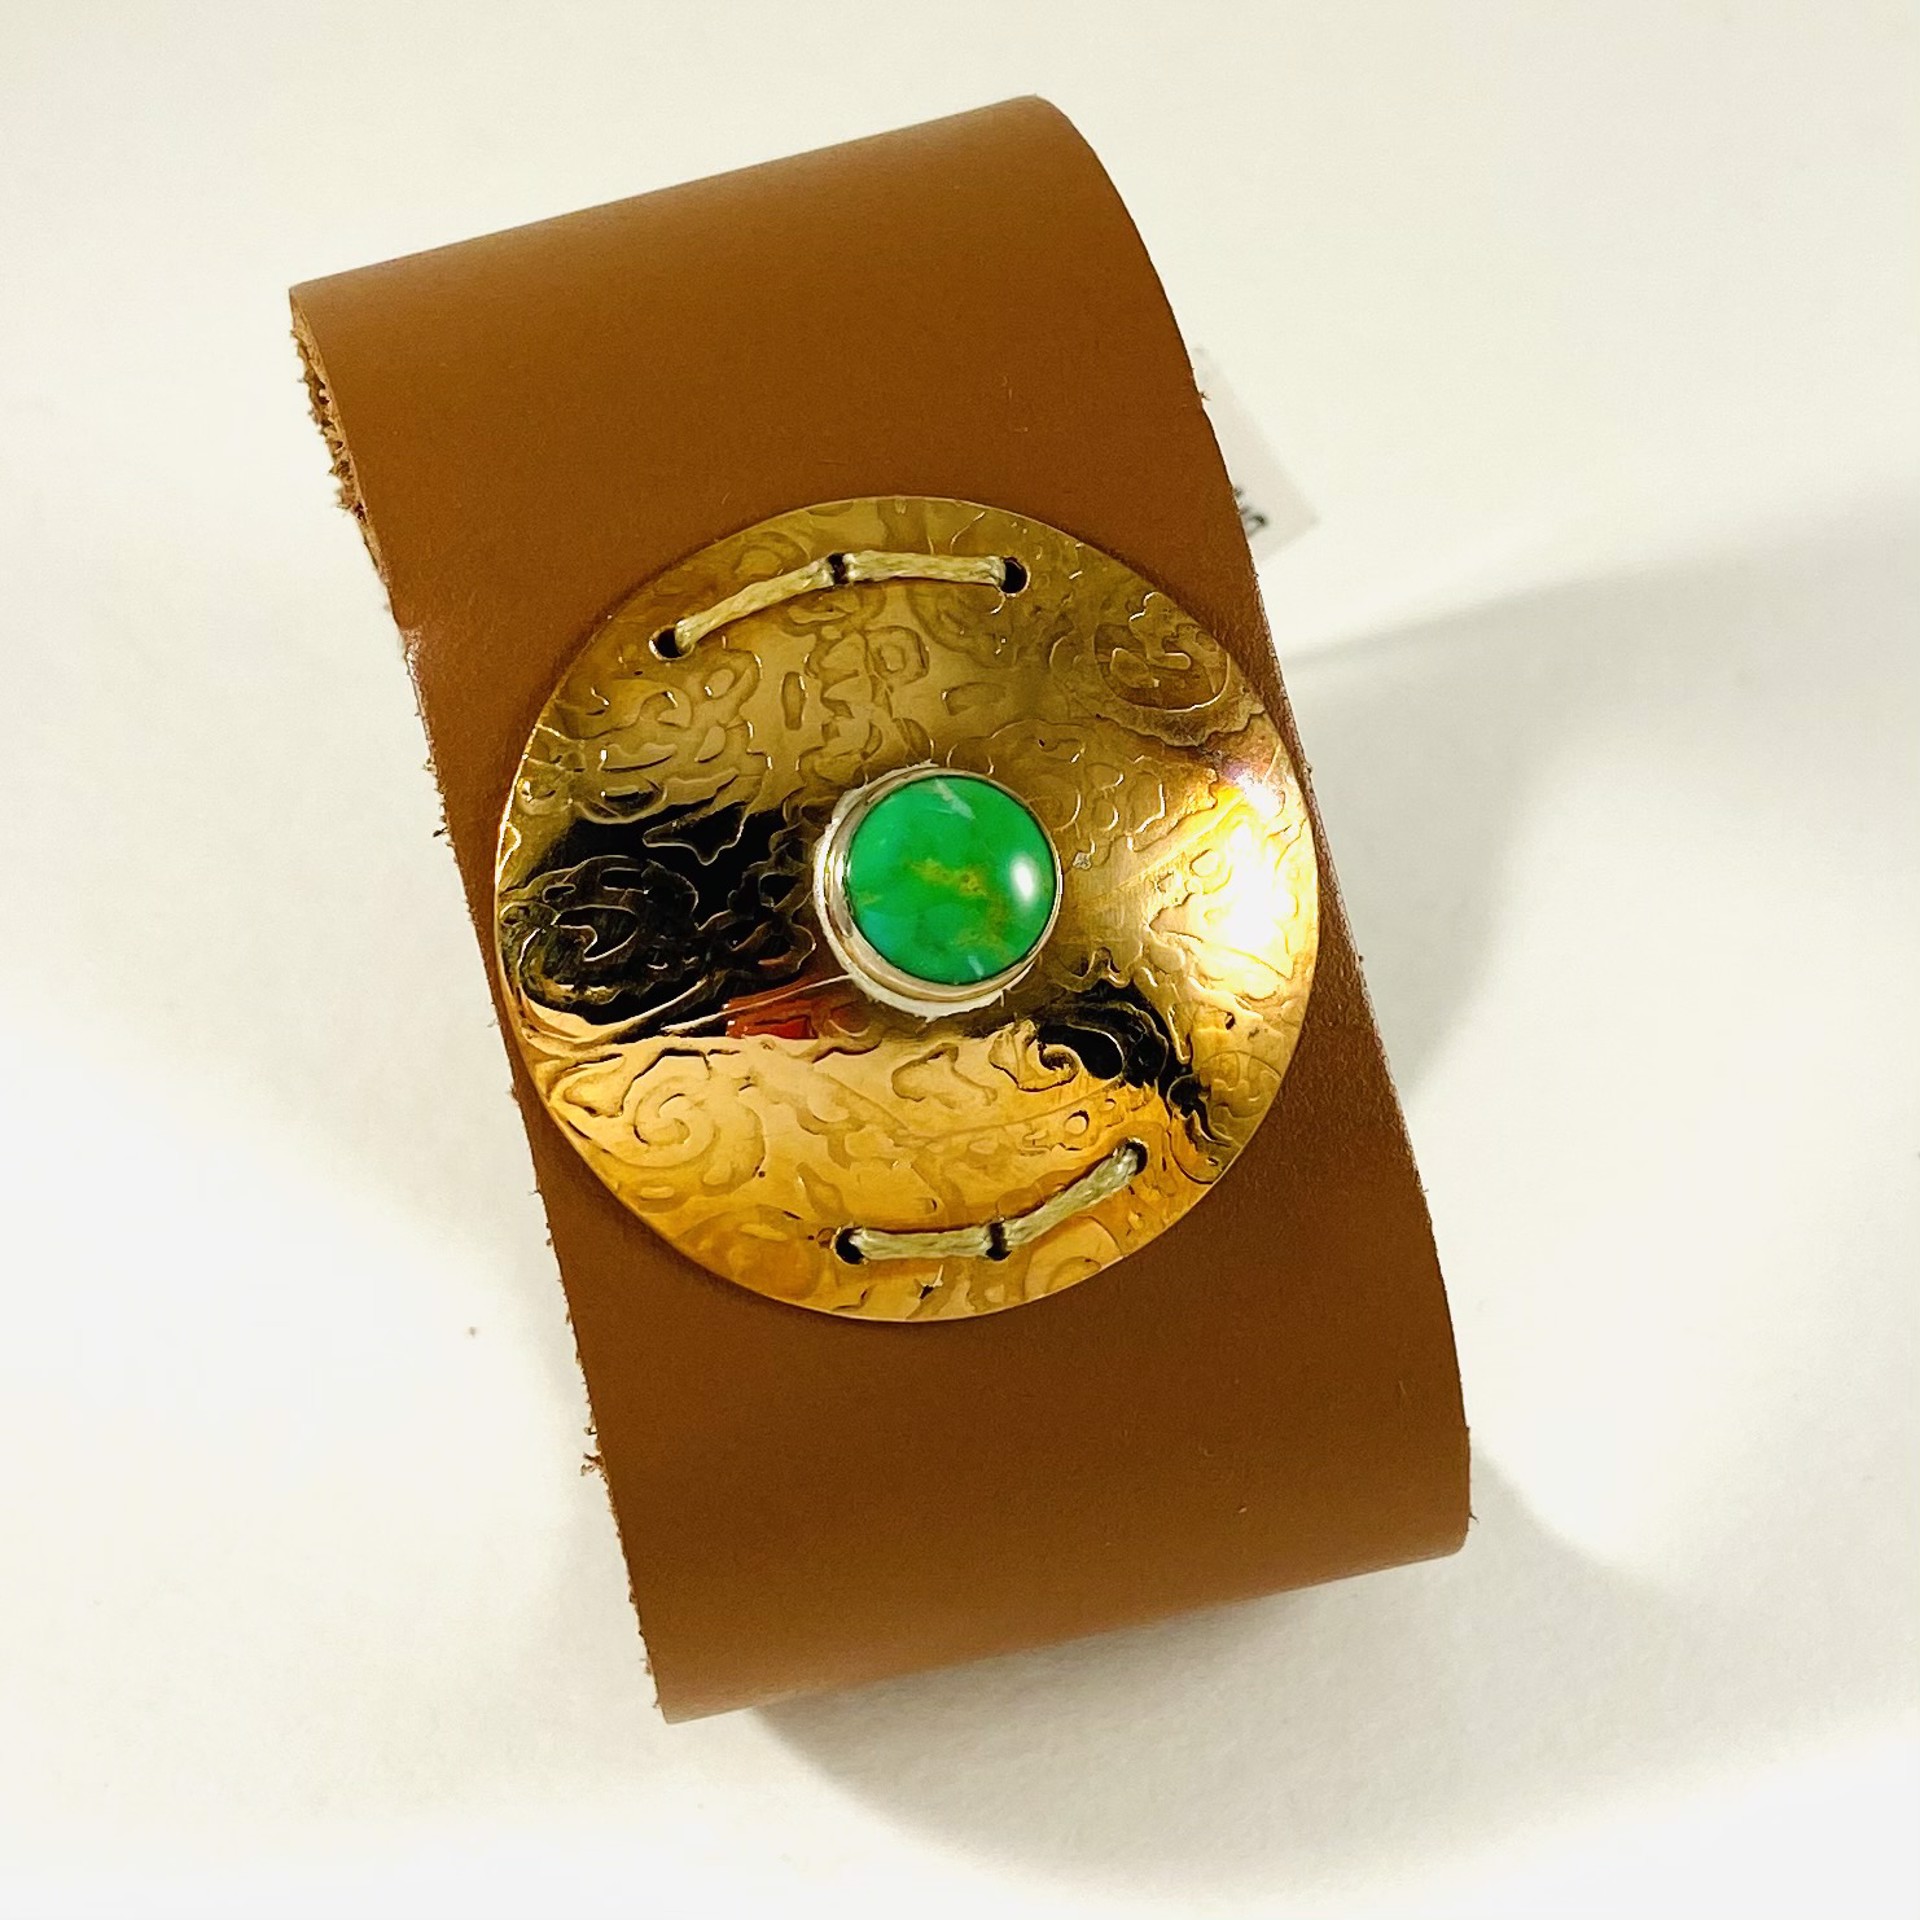 AB21-36 Green Turquoise and Bronze on Leather Cuff Bracelet by Anne Bivens